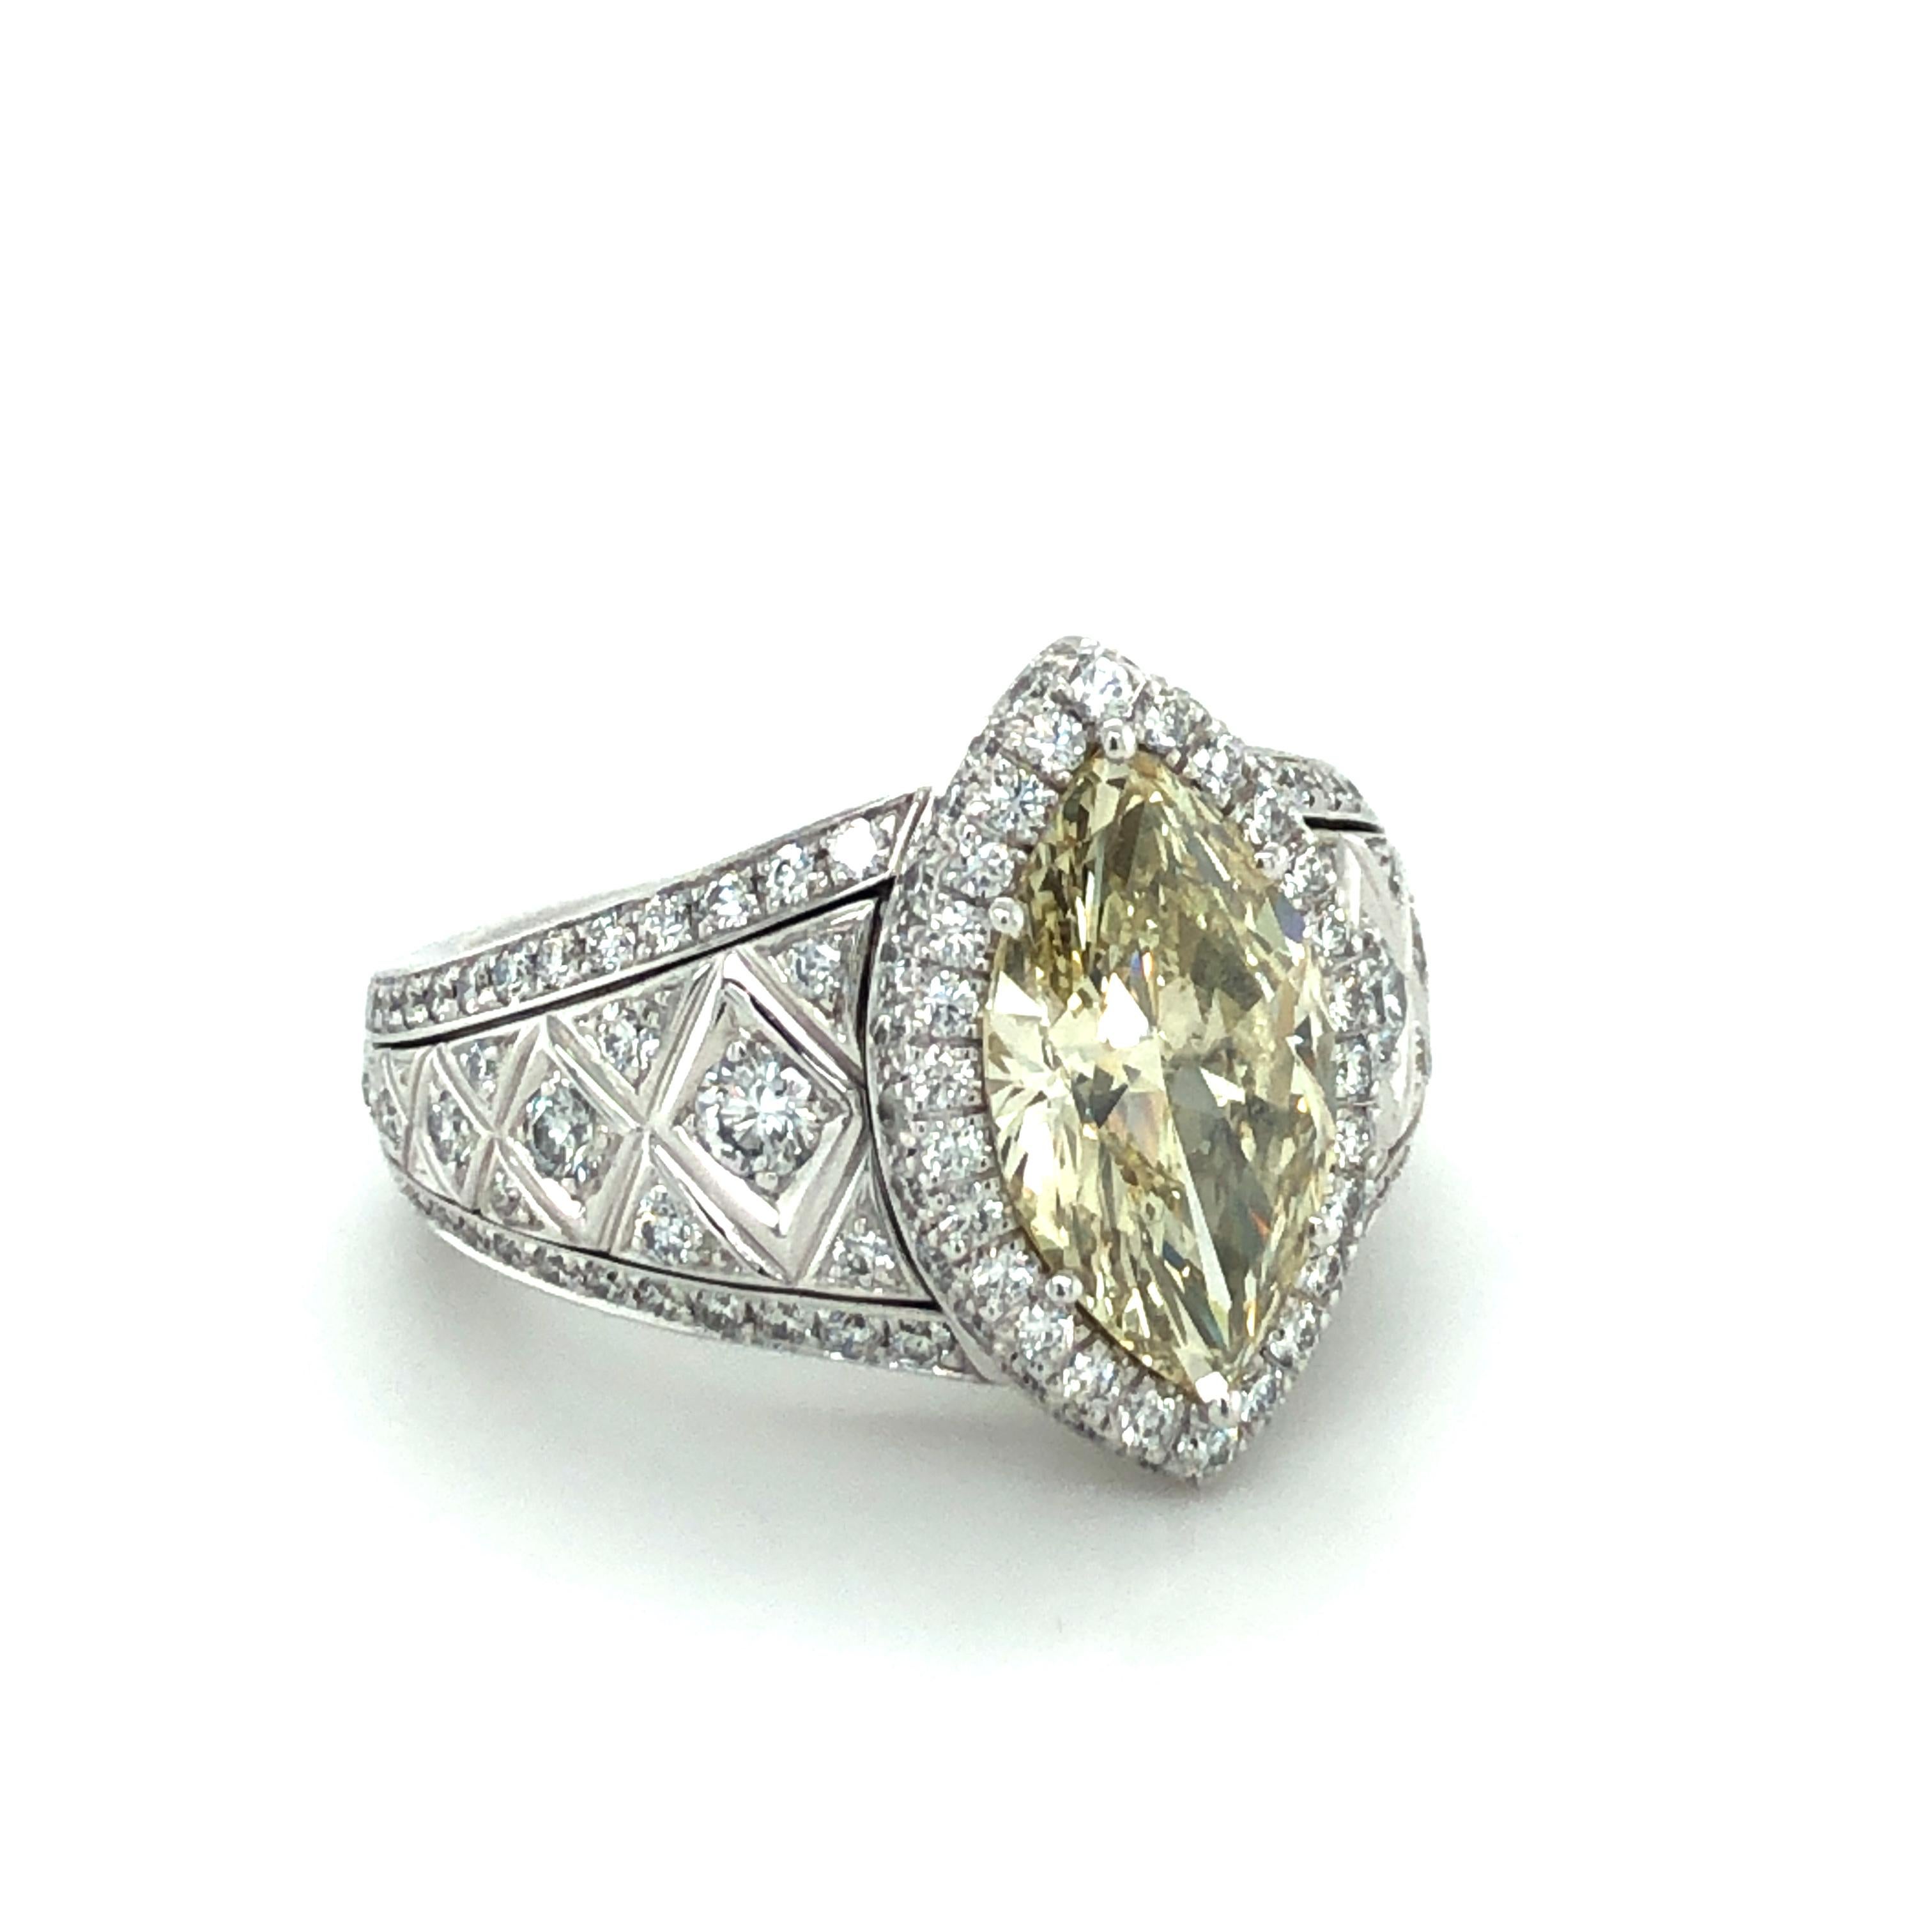 Contemporary 2.77 Carat Marquise-Cut Diamond Ring by Avalon Swiss in 18 Karat White Gold For Sale